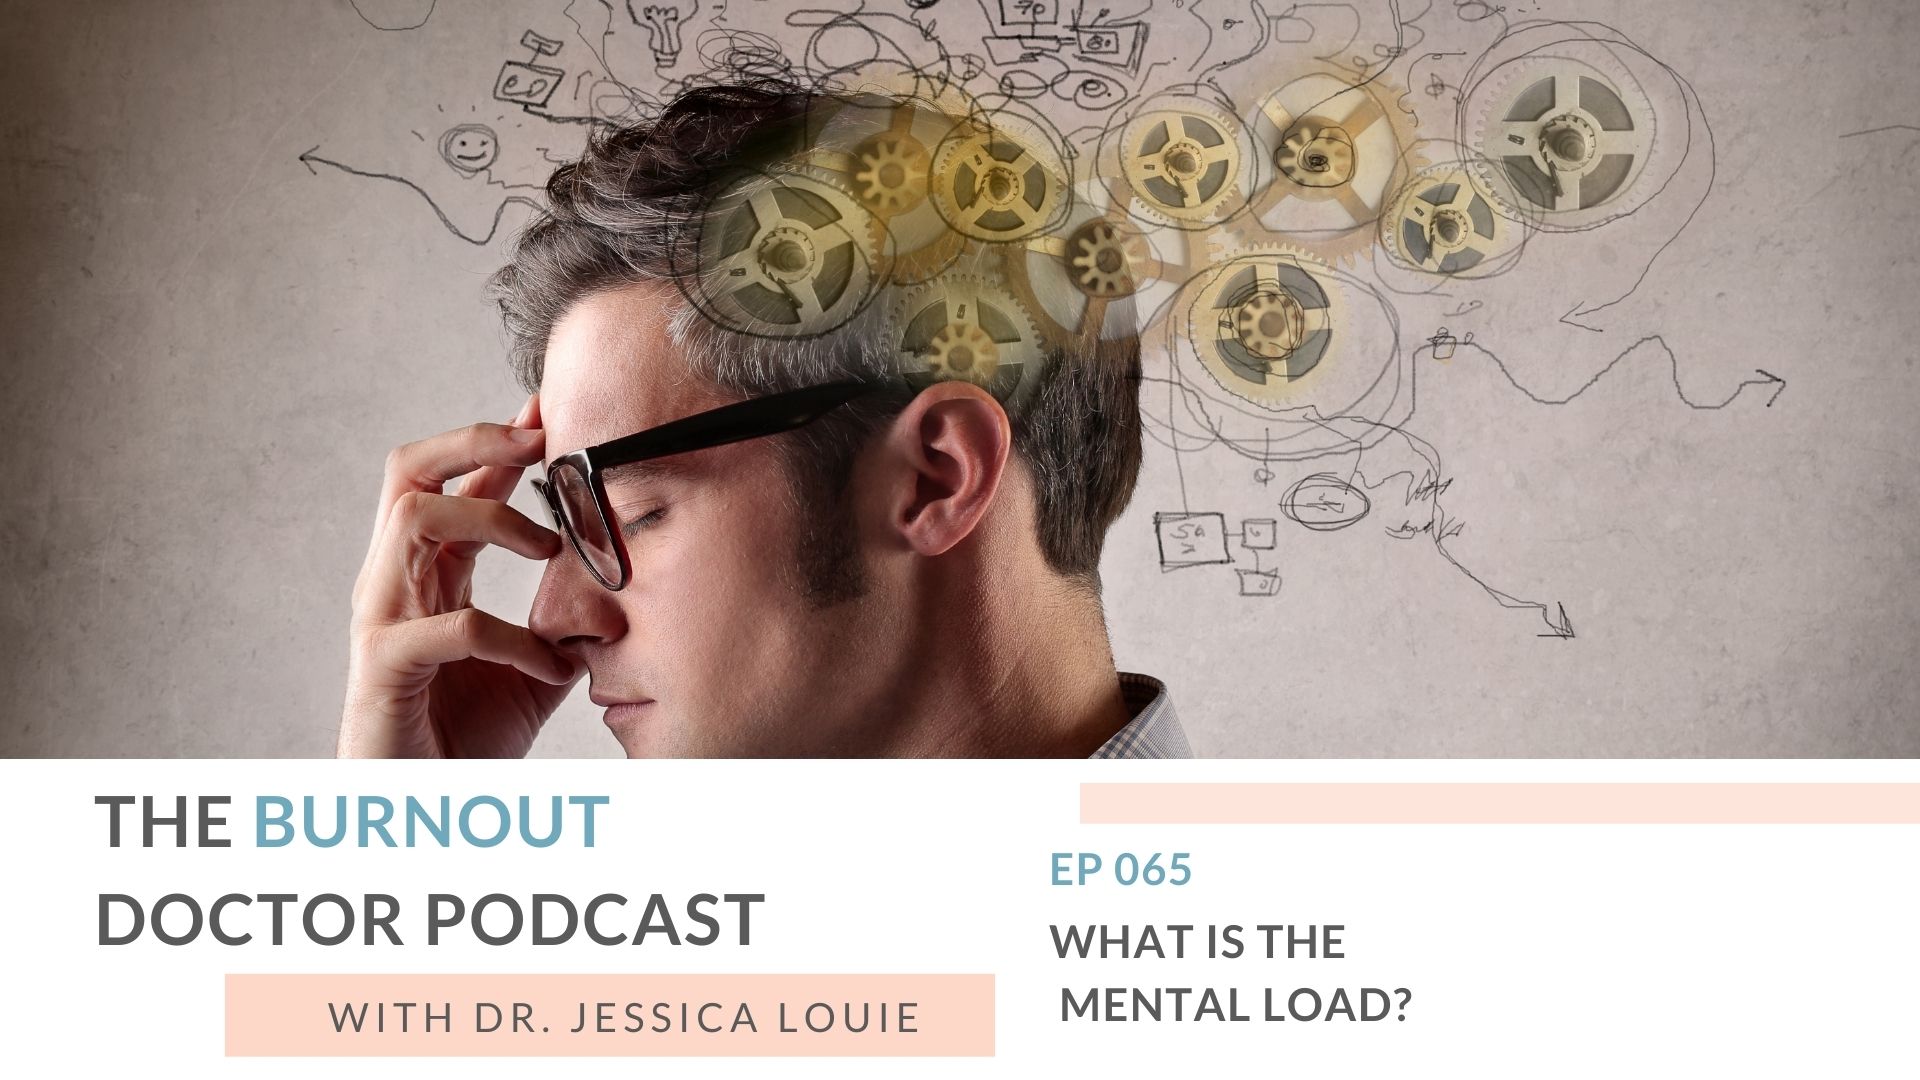 What is mental load? What is mental overload? How is mental clutter related to burnout. Pharmacist burnout and the KonMari Method. The Burnout Doctor Podcast by Dr. Jessica Louie. Pharmacist Burnout coaching and VIP KonMari coaching in Los Angeles